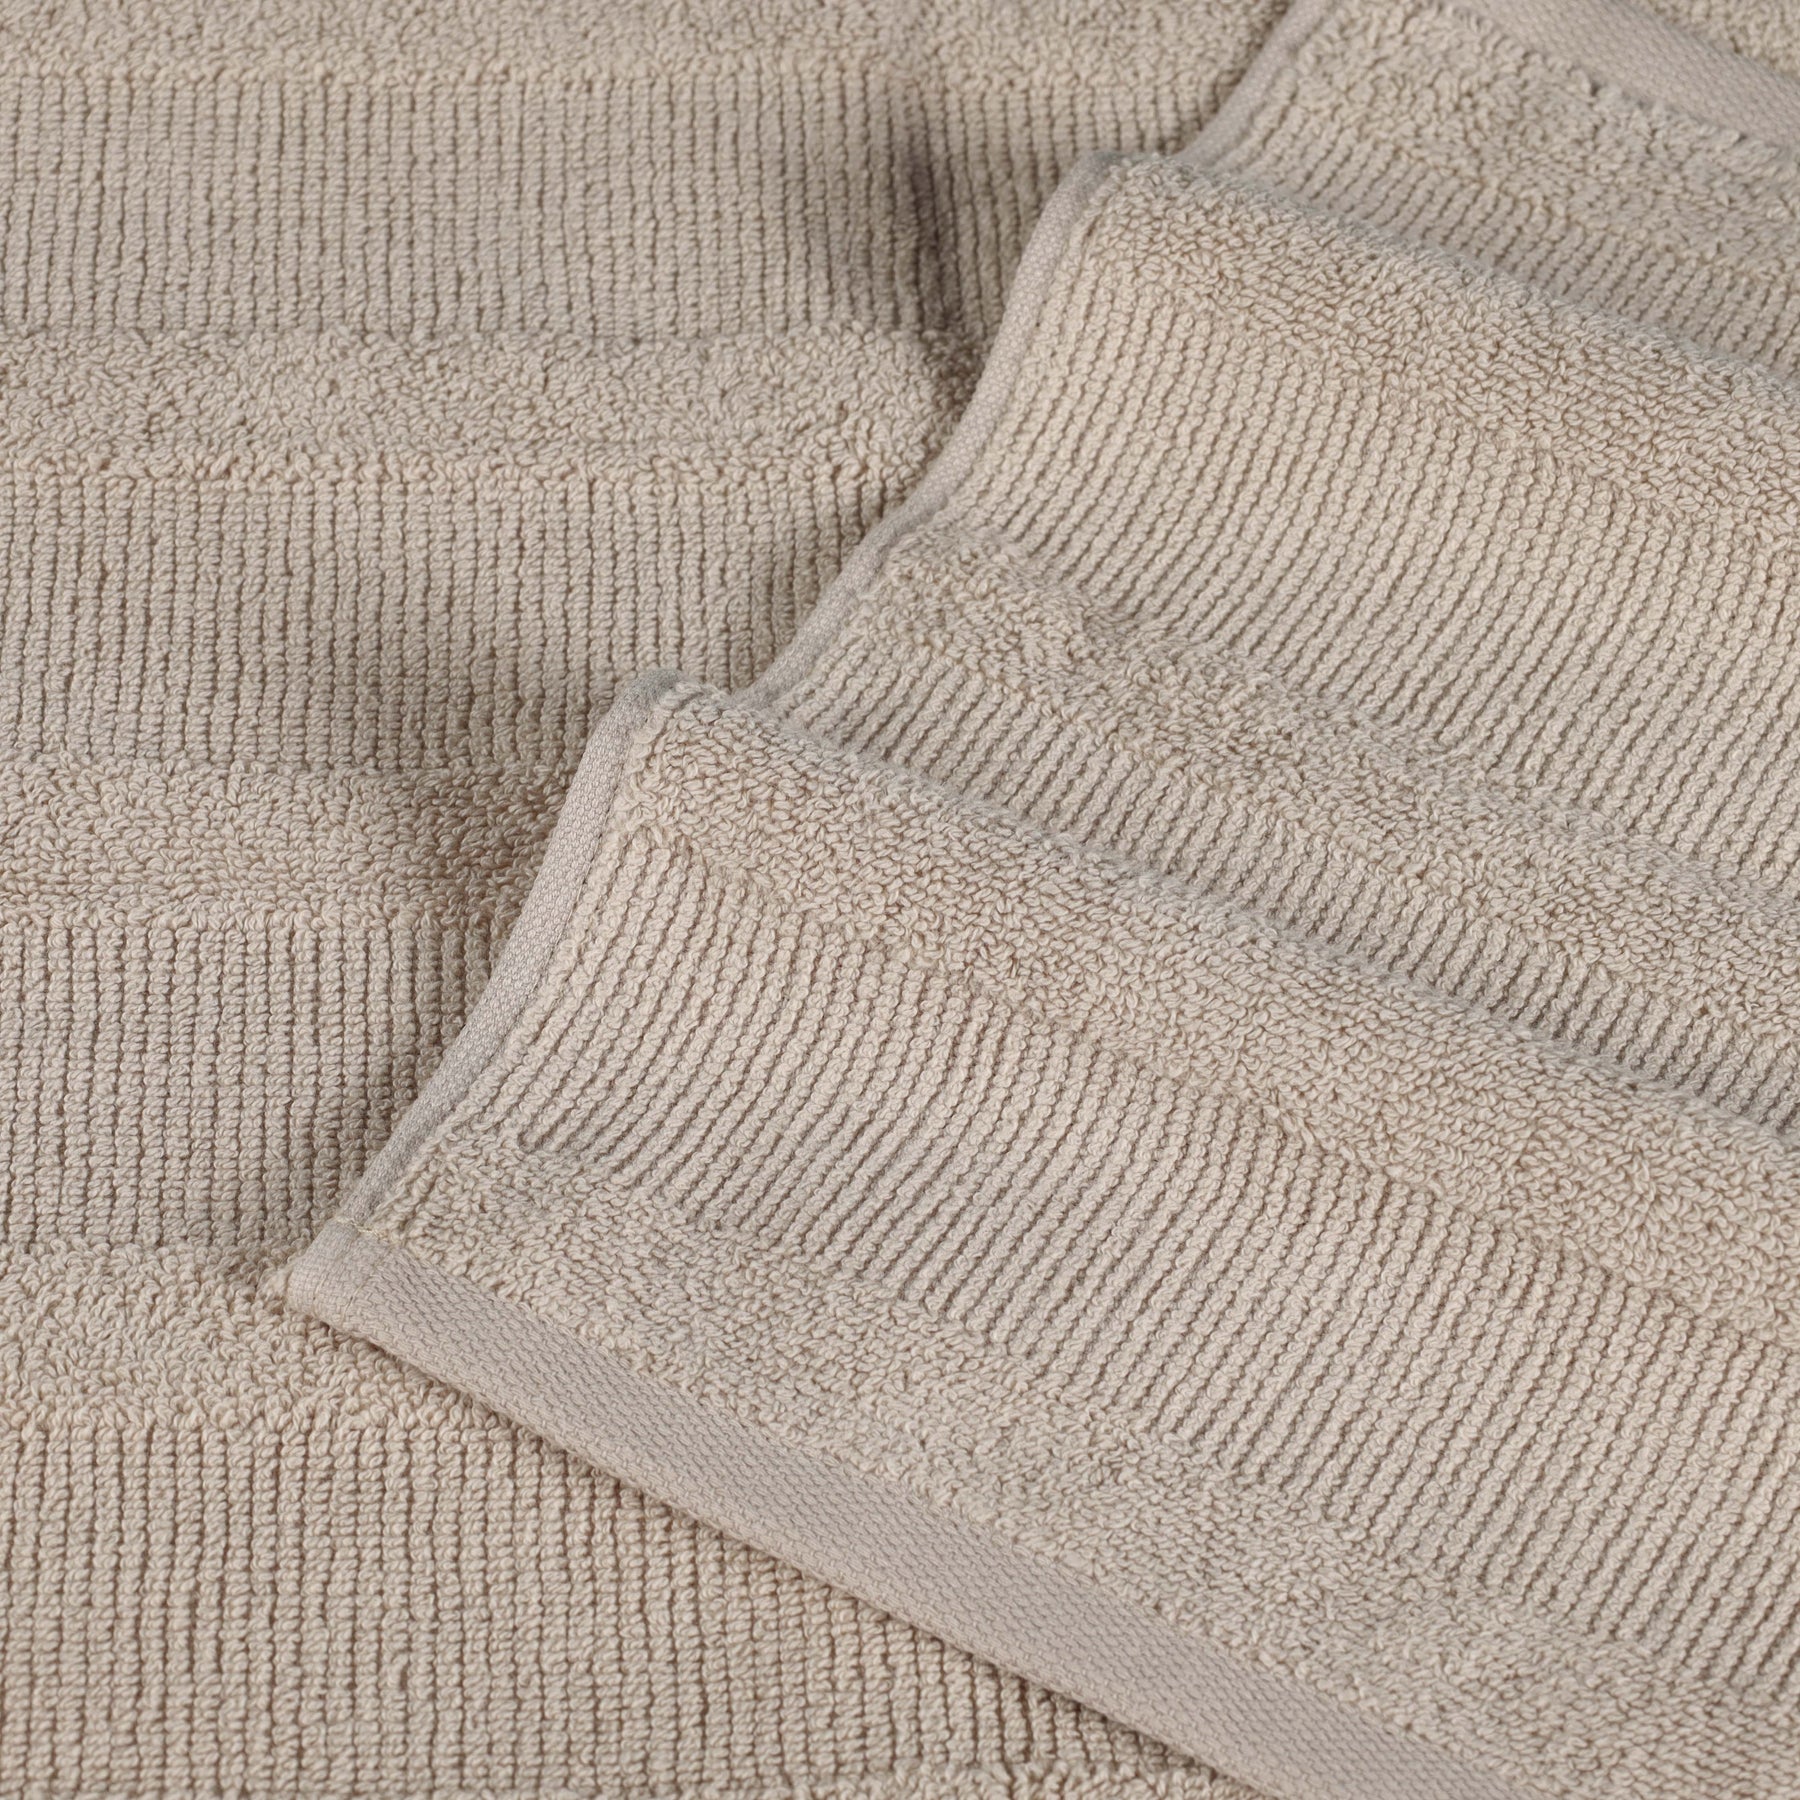 Roma Cotton Ribbed Textured Soft Highly Absorbent Bath Towel - Stone